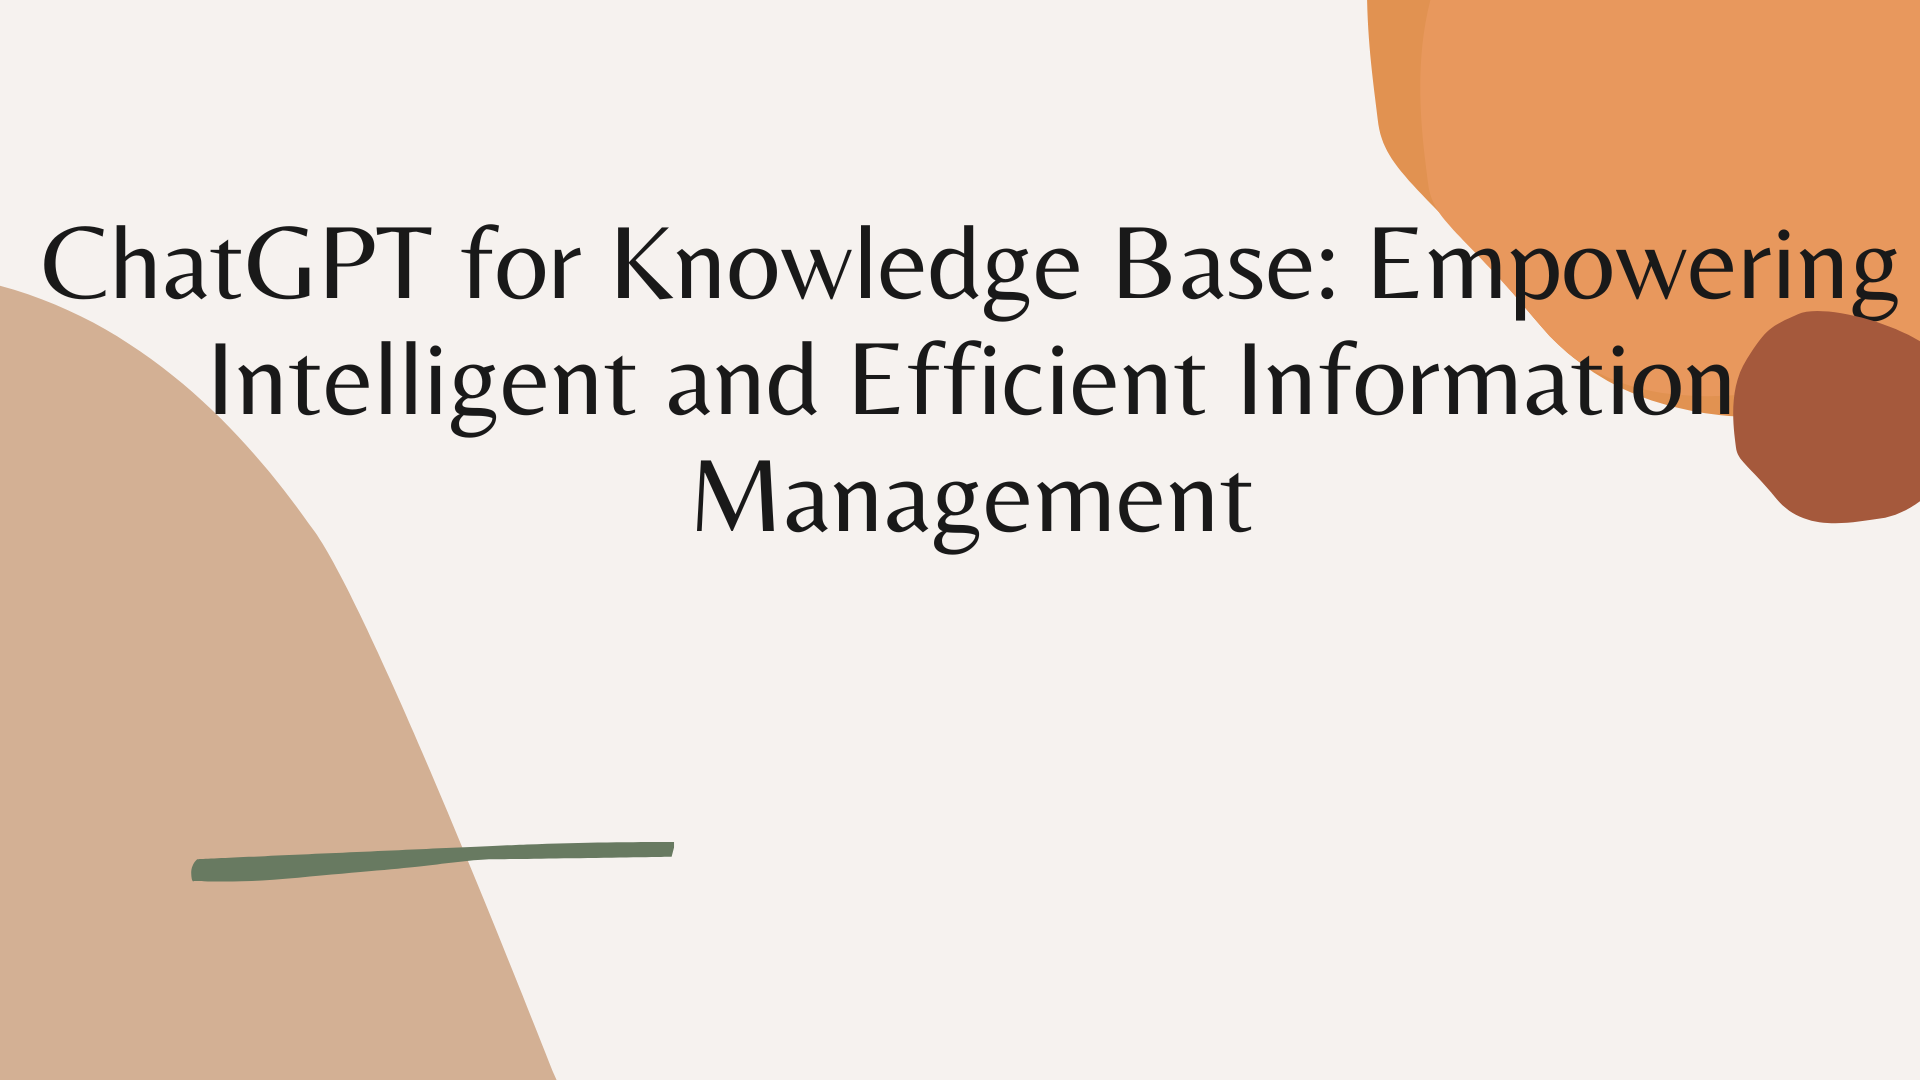 ChatGPT for Knowledge Base: Empowering Intelligent and Efficient Information Management